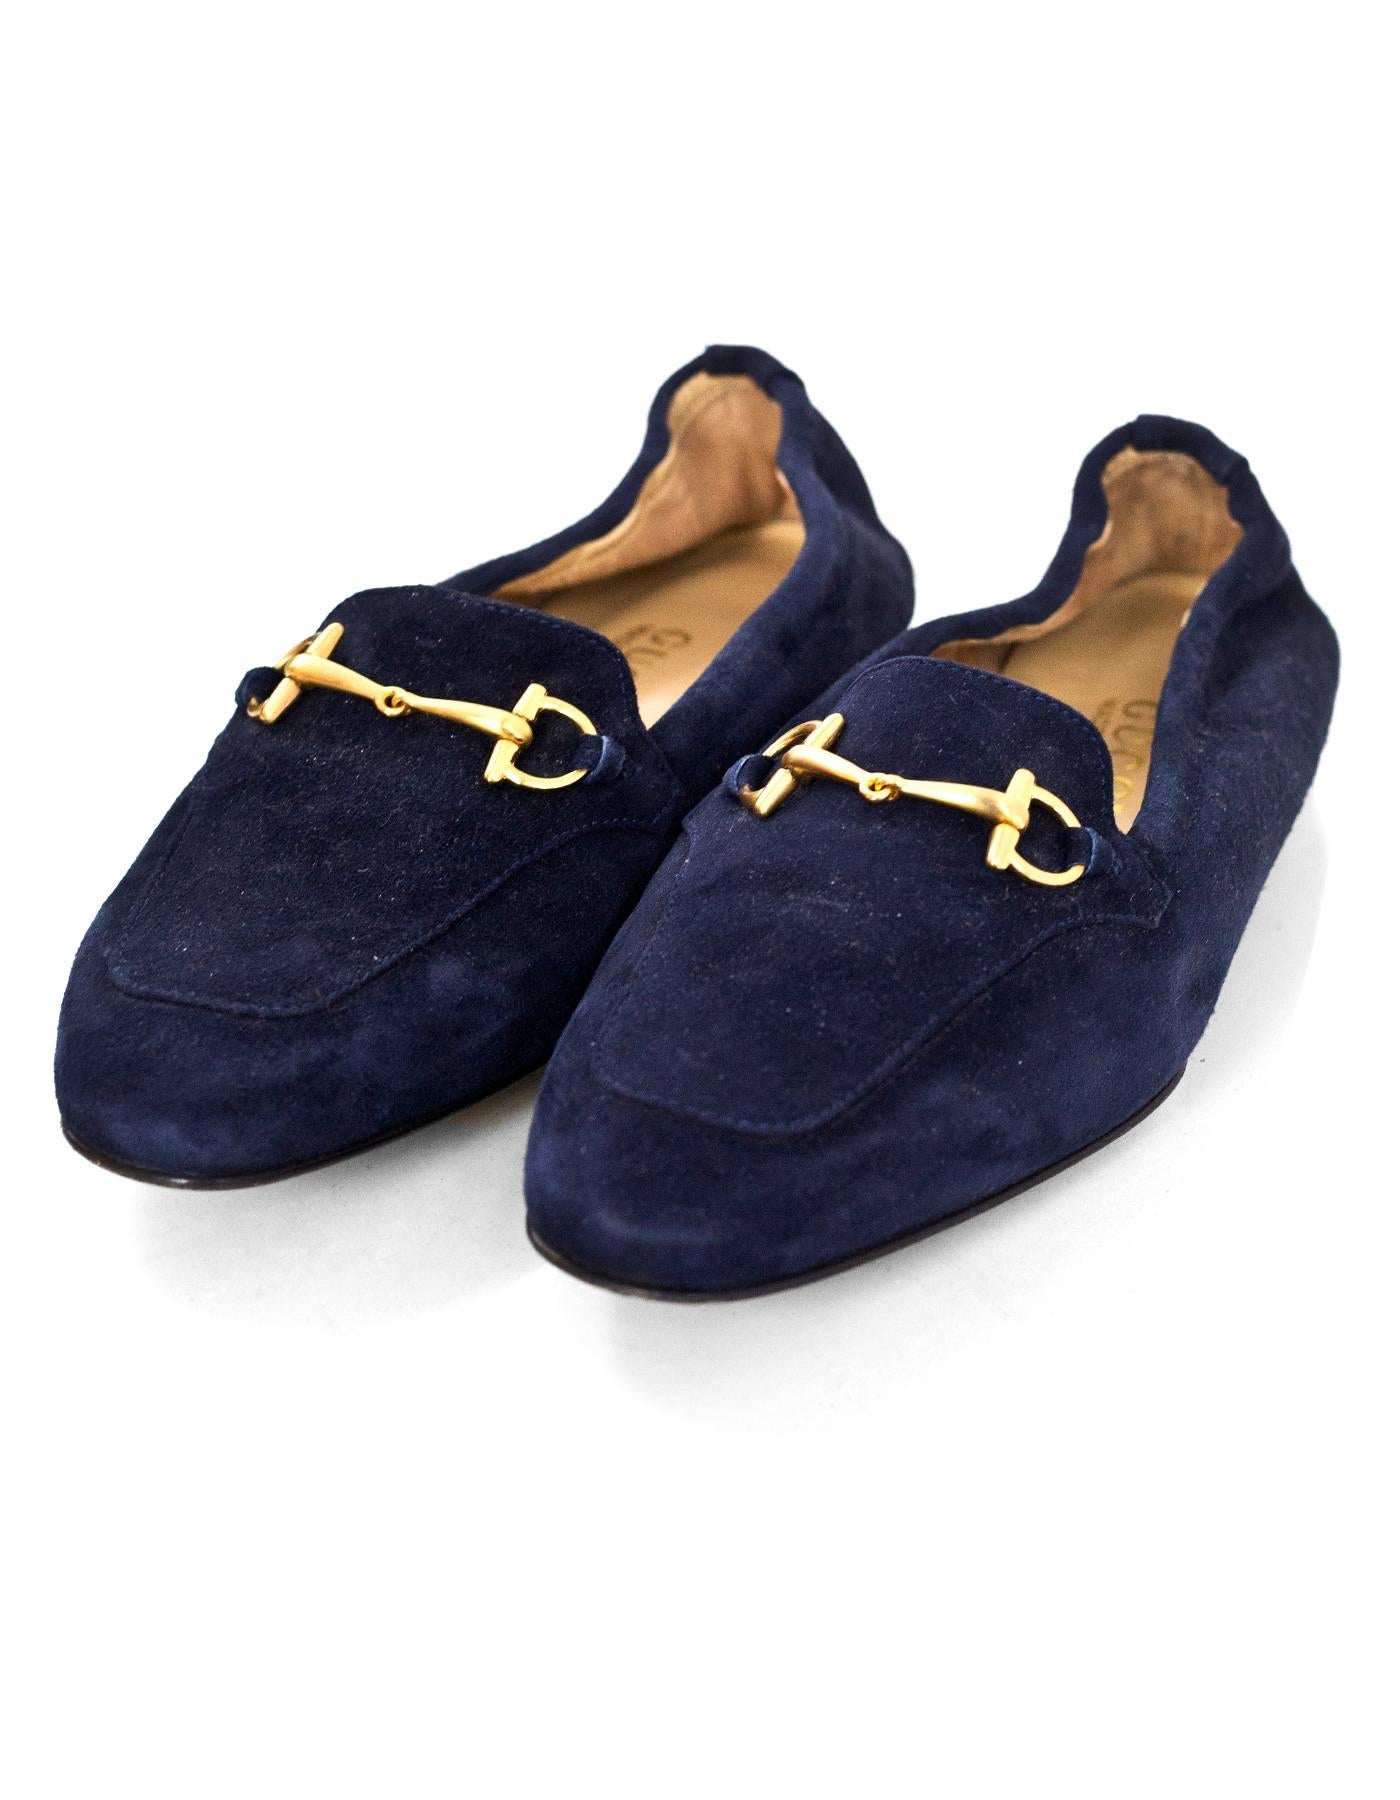 Gucci Navy Suede Horsebit Loafers Sz 37C NEW

This is a wide fit shoe

Made In: Italy
Color: Navy
Materials: Suede
Closure/Opening: Slide on with stretch elastic at heel
Sole Stamp: Gucci Made in Italy C 37
Overall Condition: Excellent pre-owned